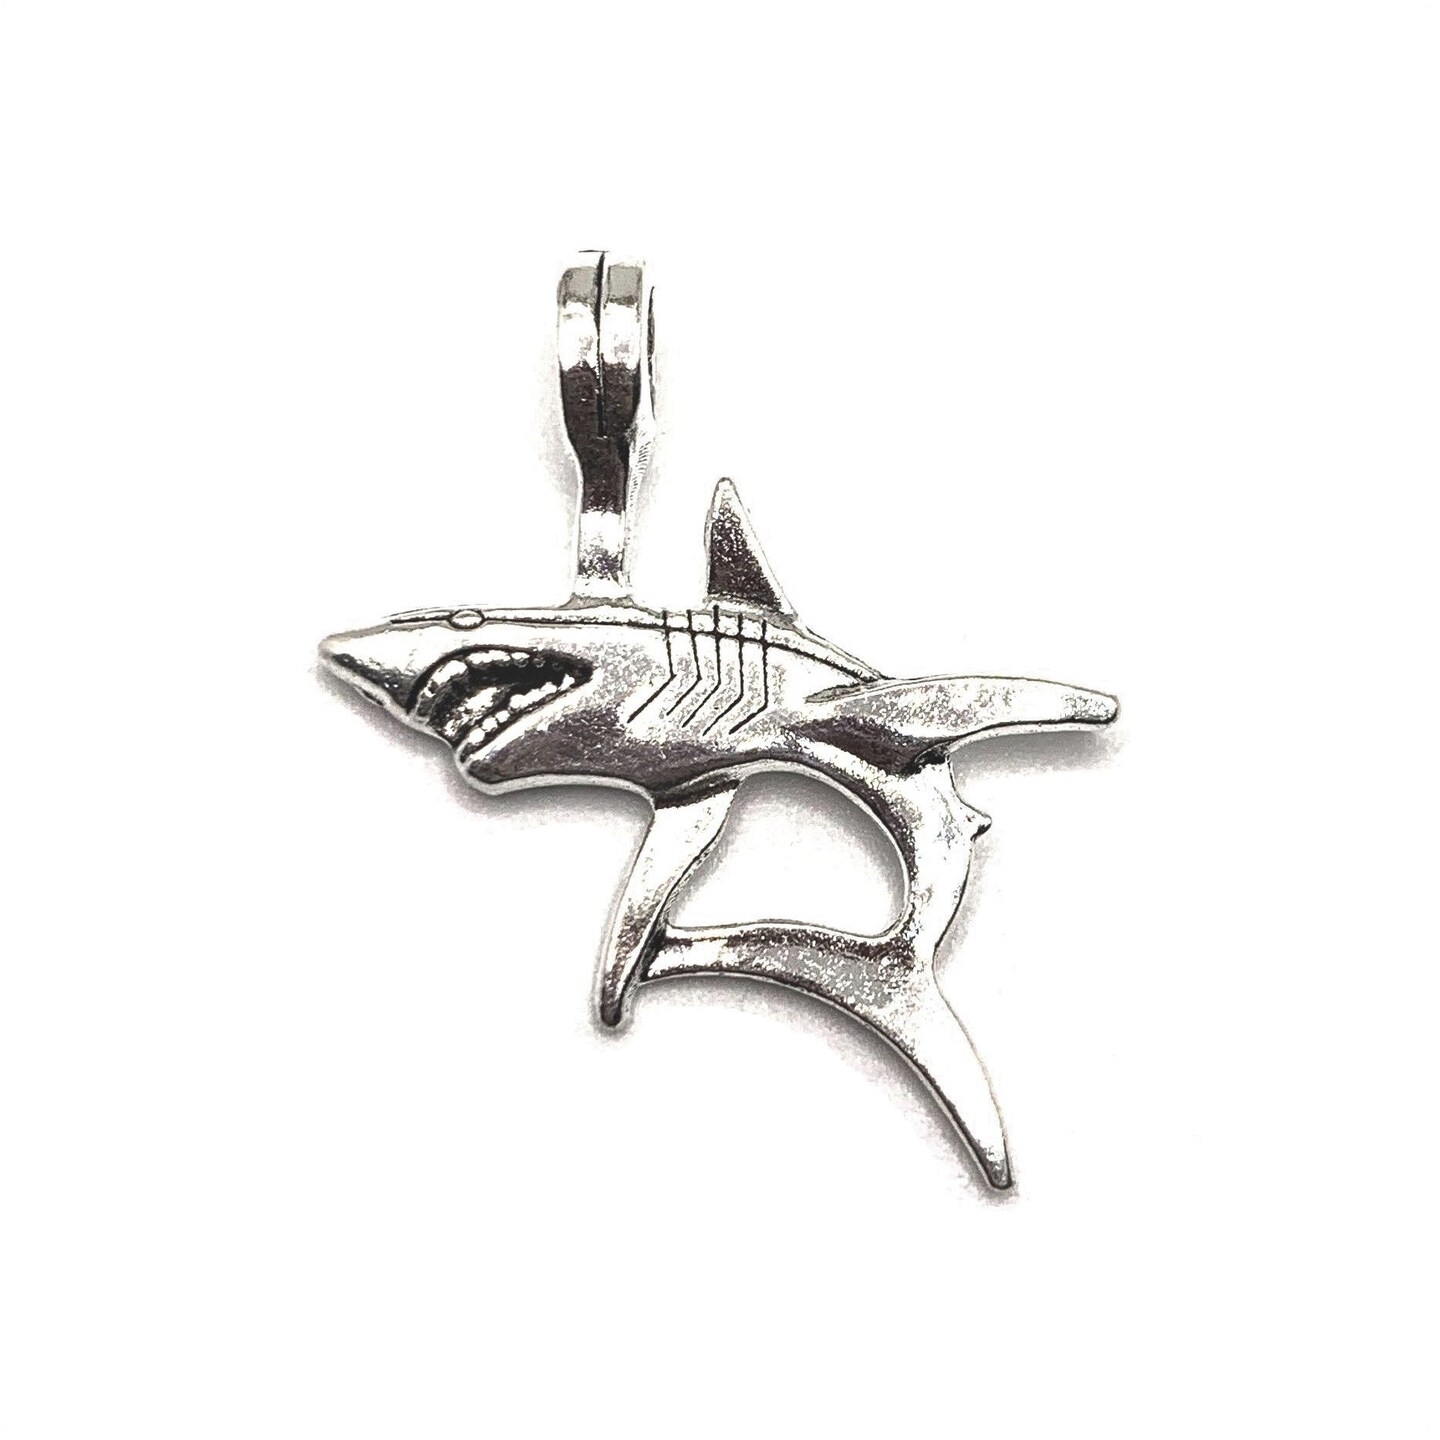 4 or 12 Pieces: Silver Shark Charms - Double Sided